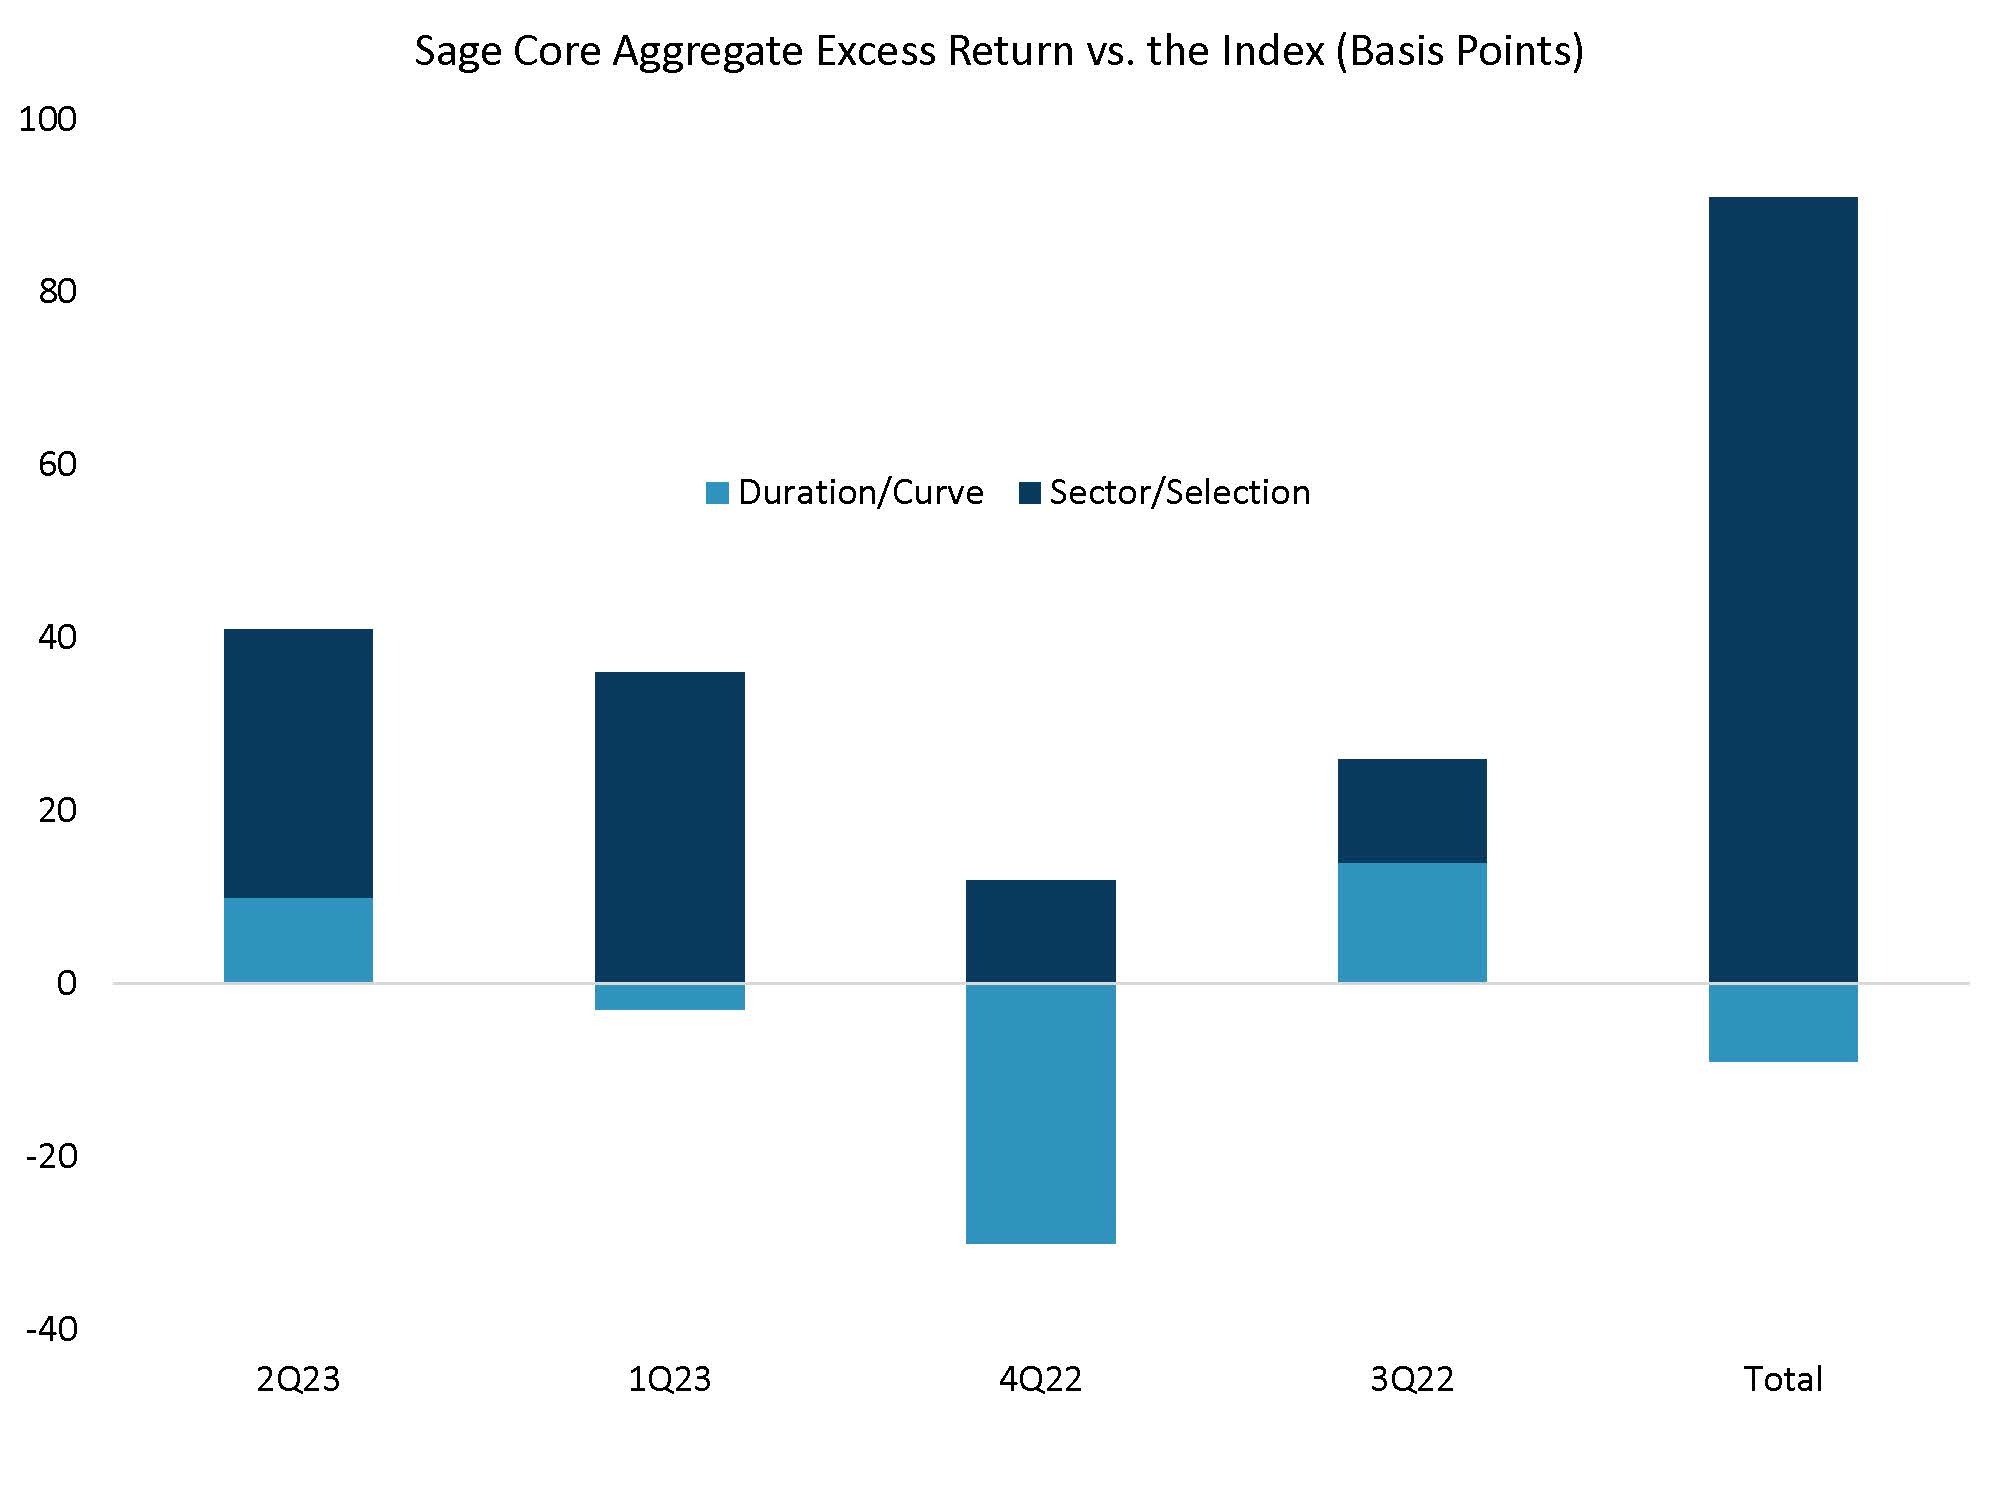 Sage Core Aggregate Excess Return Vs the Index Basis Points